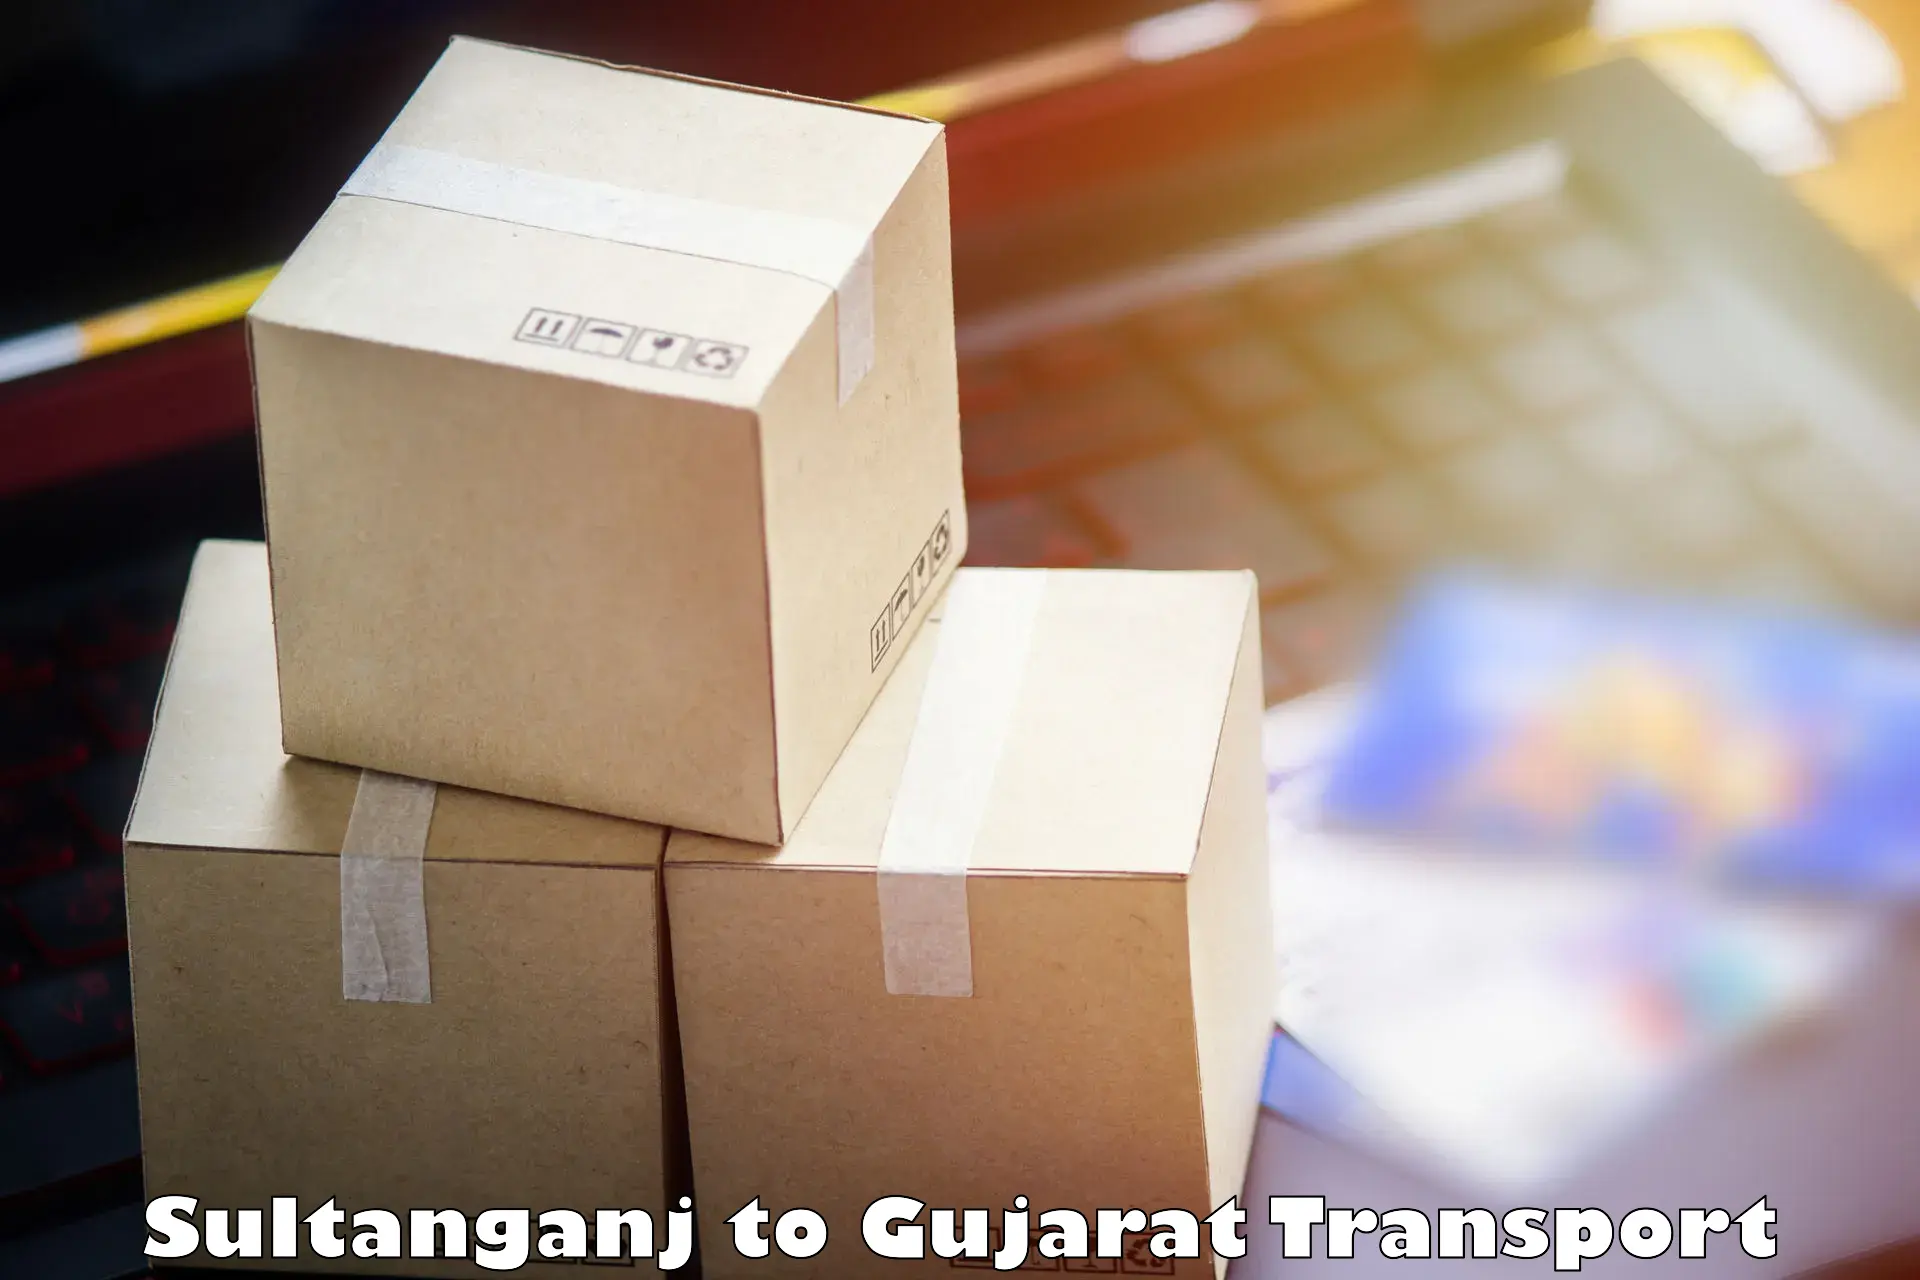 Shipping partner Sultanganj to Anand Agricultural University